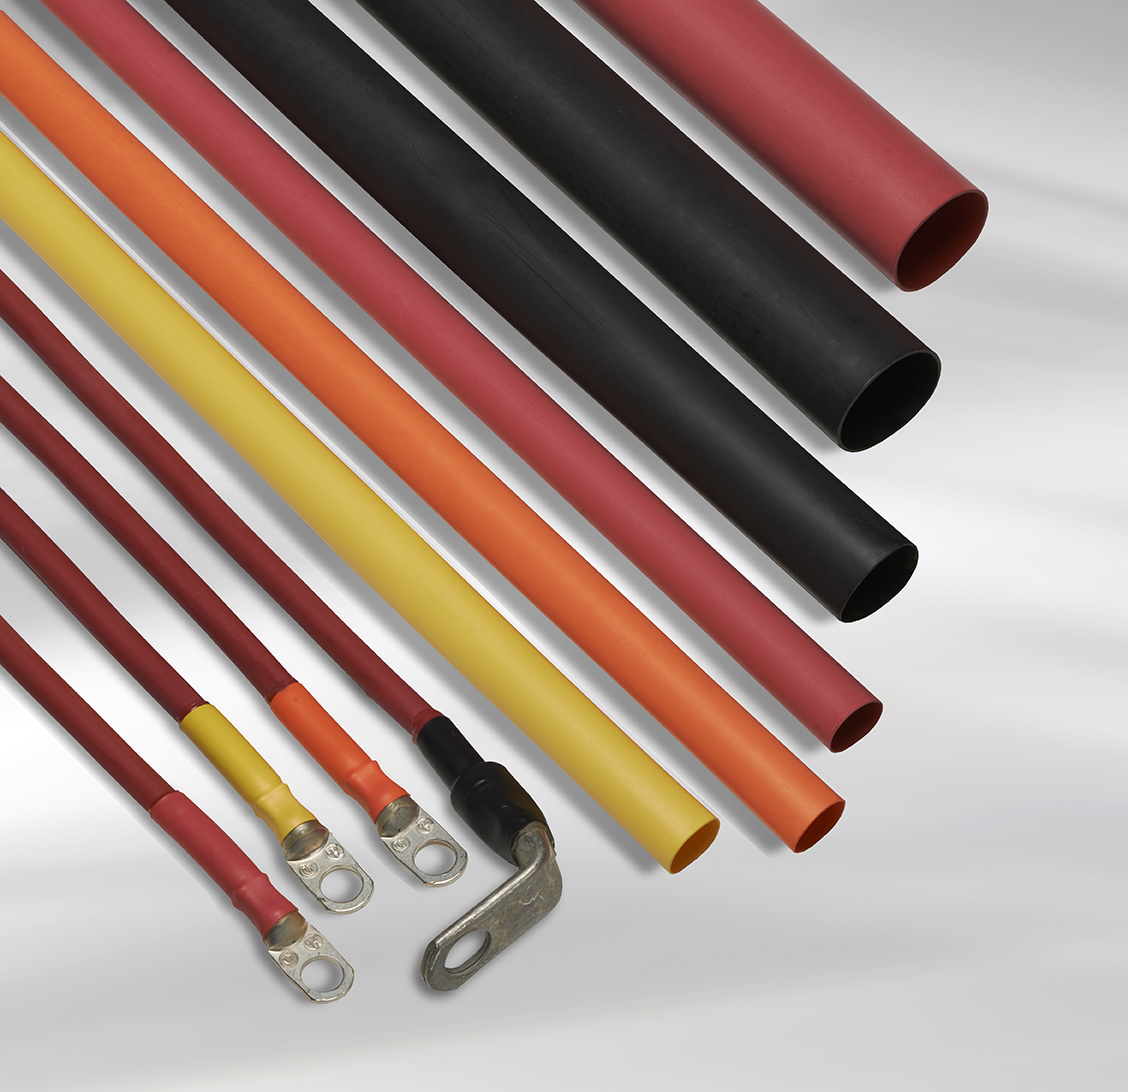 Dual Wall Heat Shrink Tubing Suitable for Harsh Environments 2.5 Heat Shrink Tubing